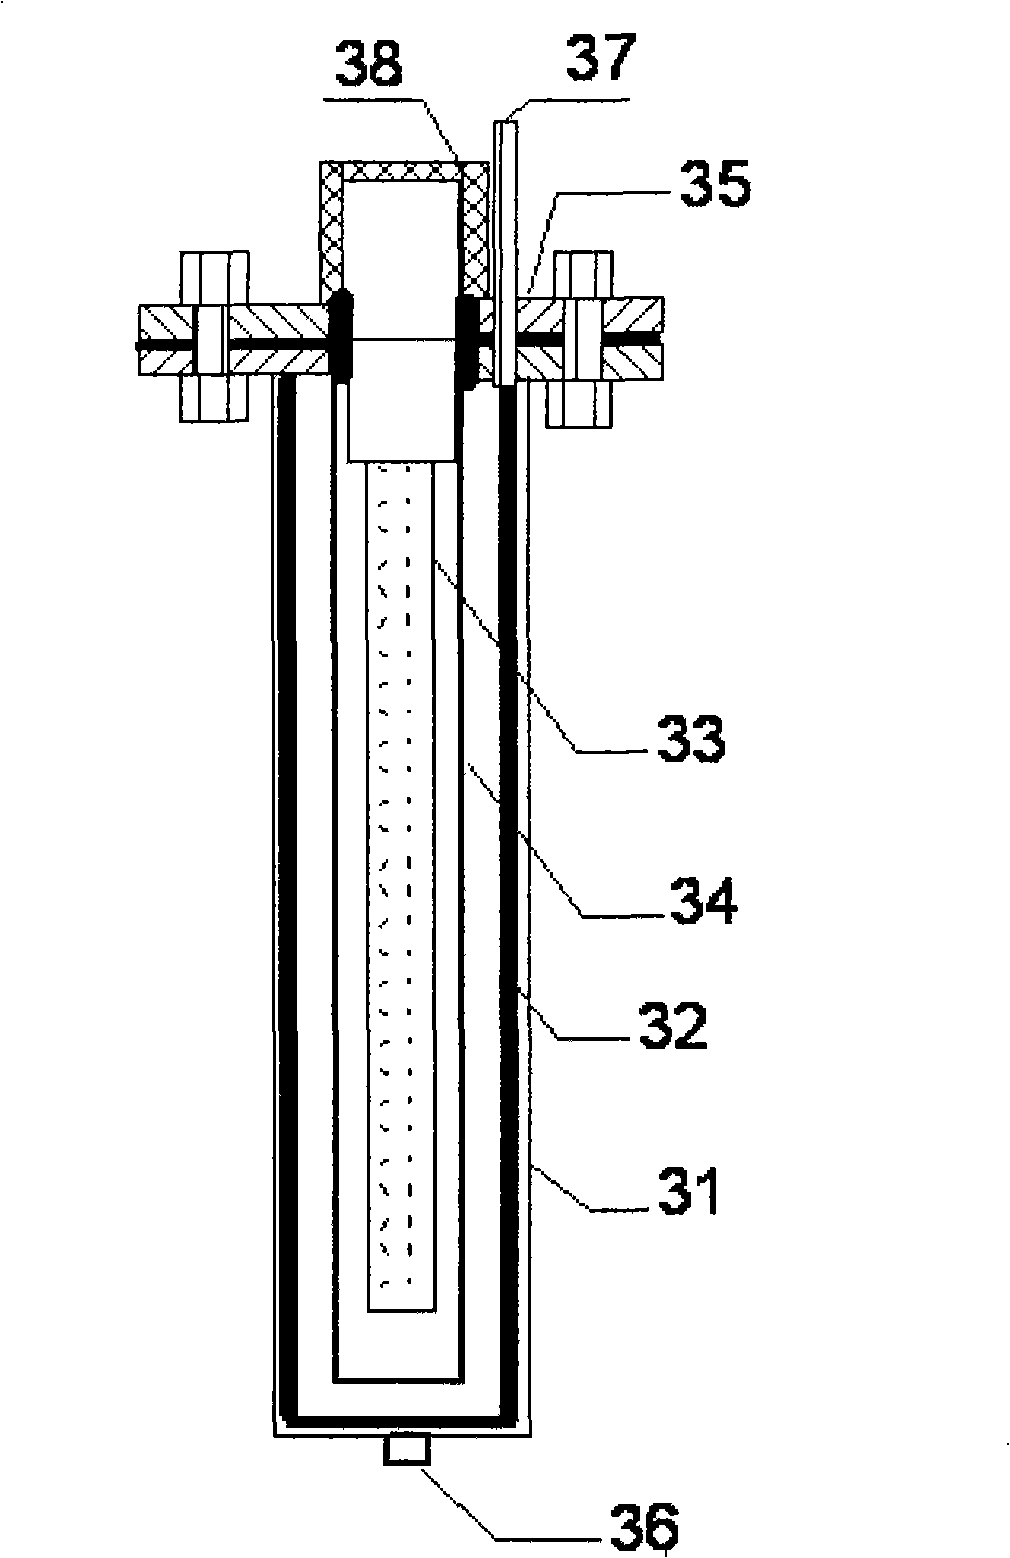 Drinking water purifying device combining photocatalysis and inorganic membrane filtration technology